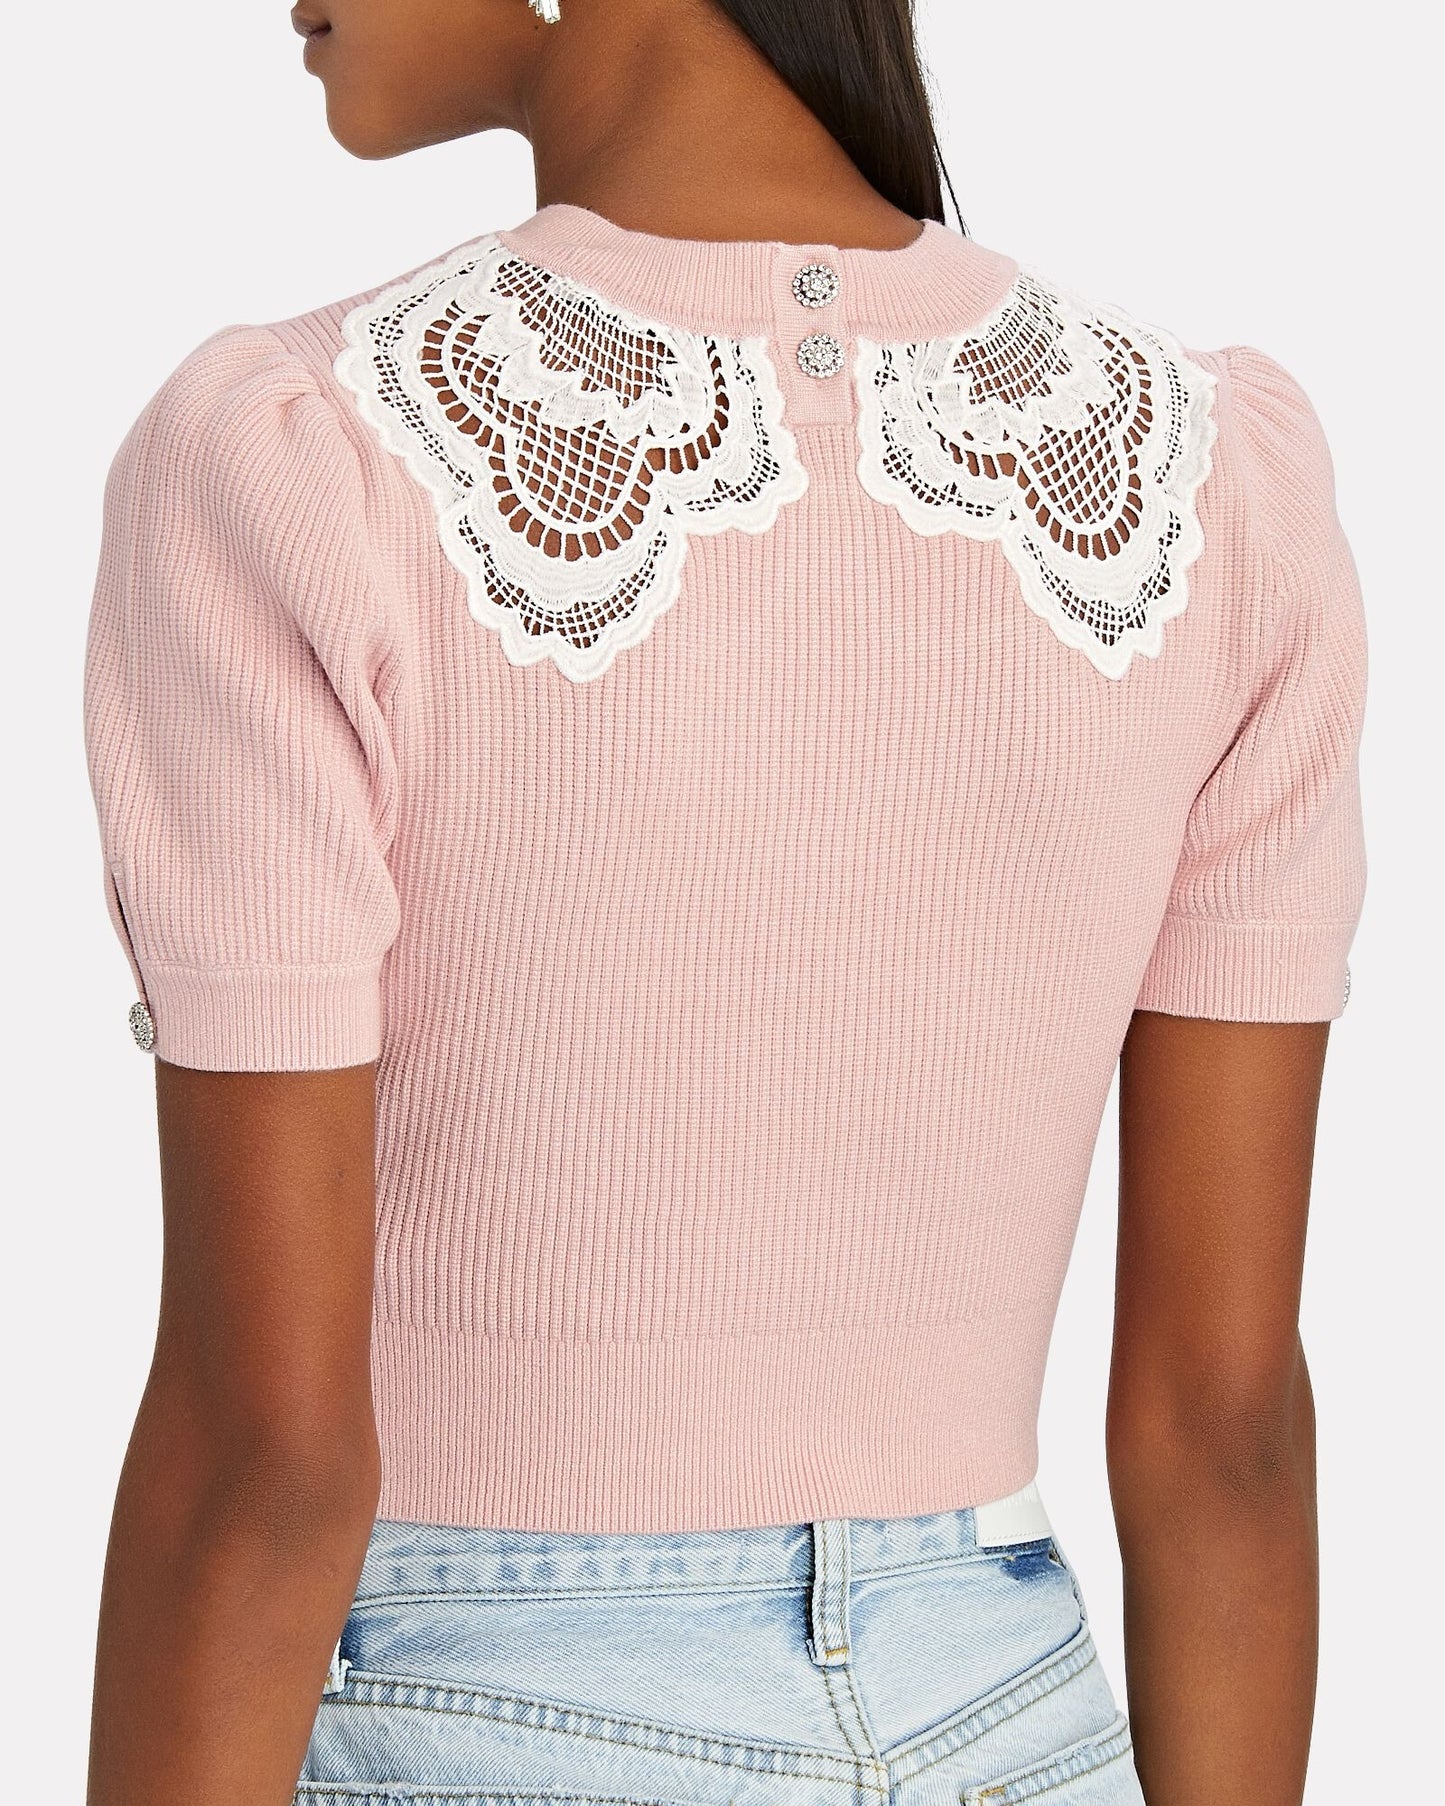 Guipure Lace-Trimmed Rib Knit Top